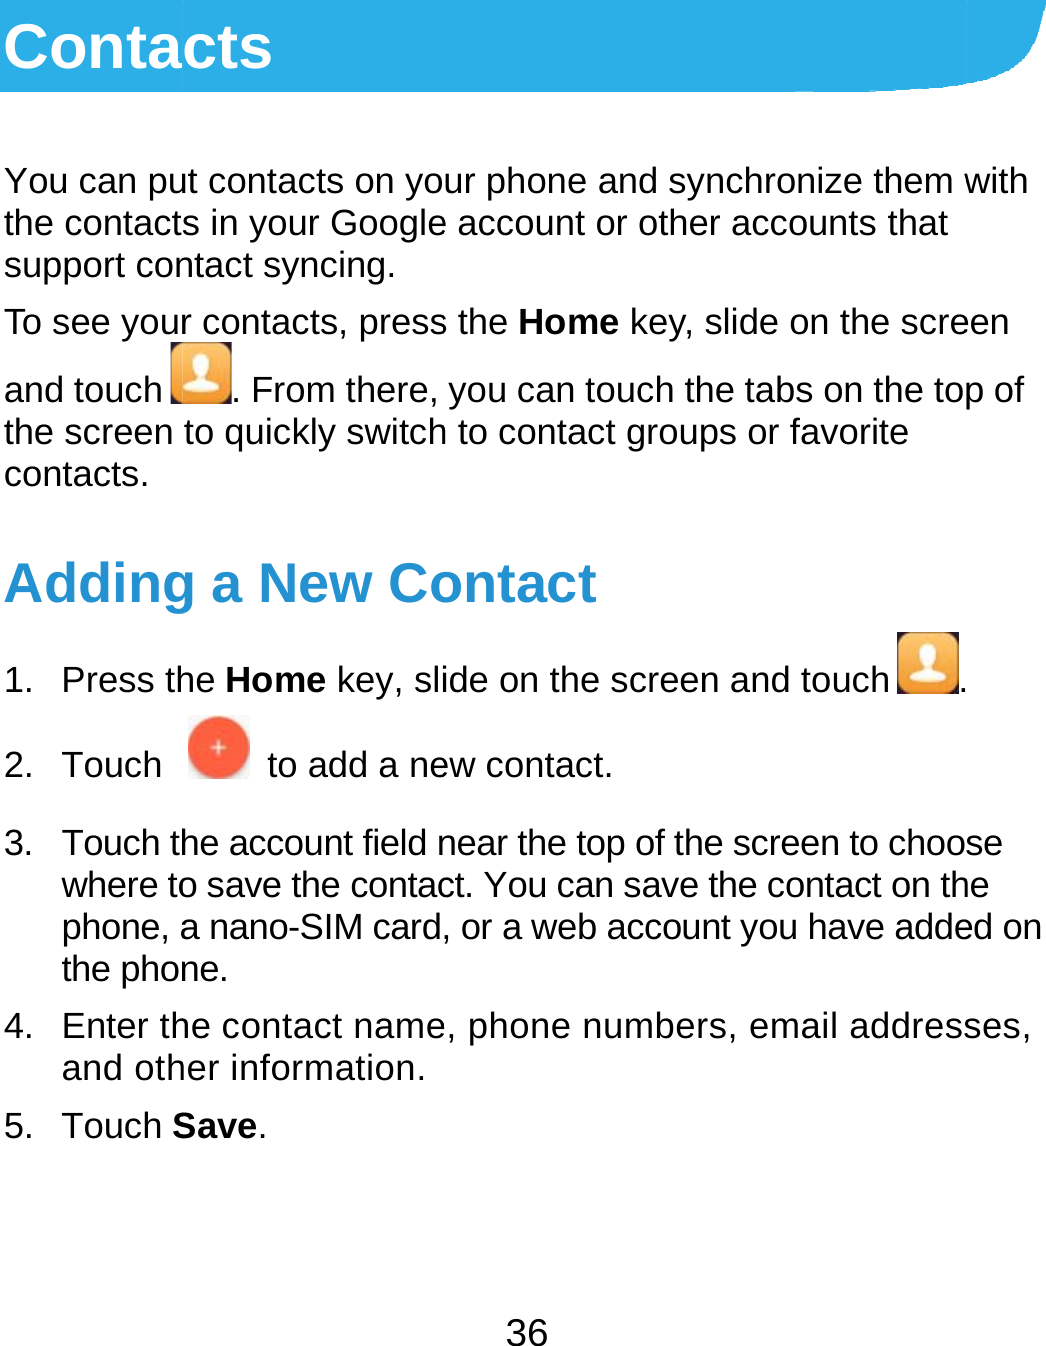  ContaYou can puthe contactsupport conTo see yourand touchthe screen contacts. Adding1. Press th2. Touch 3. Touch thwhere tophone, athe phon4. Enter thand oth5. Touch Scts ut contacts on yos in your Googlentact syncing. r contacts, press. From there, to quickly switchg a New Cohe Home key, sli  to add a nehe account field no save the contaca nano-SIM cardne. he contact nameher information. Save. 36 ur phone and sye account or othes the Home key, you can touch thh to contact groupontact ide on the screenew contact. near the top of thect. You can save , or a web accoune, phone numbernchronize them wer accounts that slide on the screhe tabs on the tops or favorite n and touch .e screen to choothe contact on thnt you have adders, email addresswith een p of  se he ed on ses, 